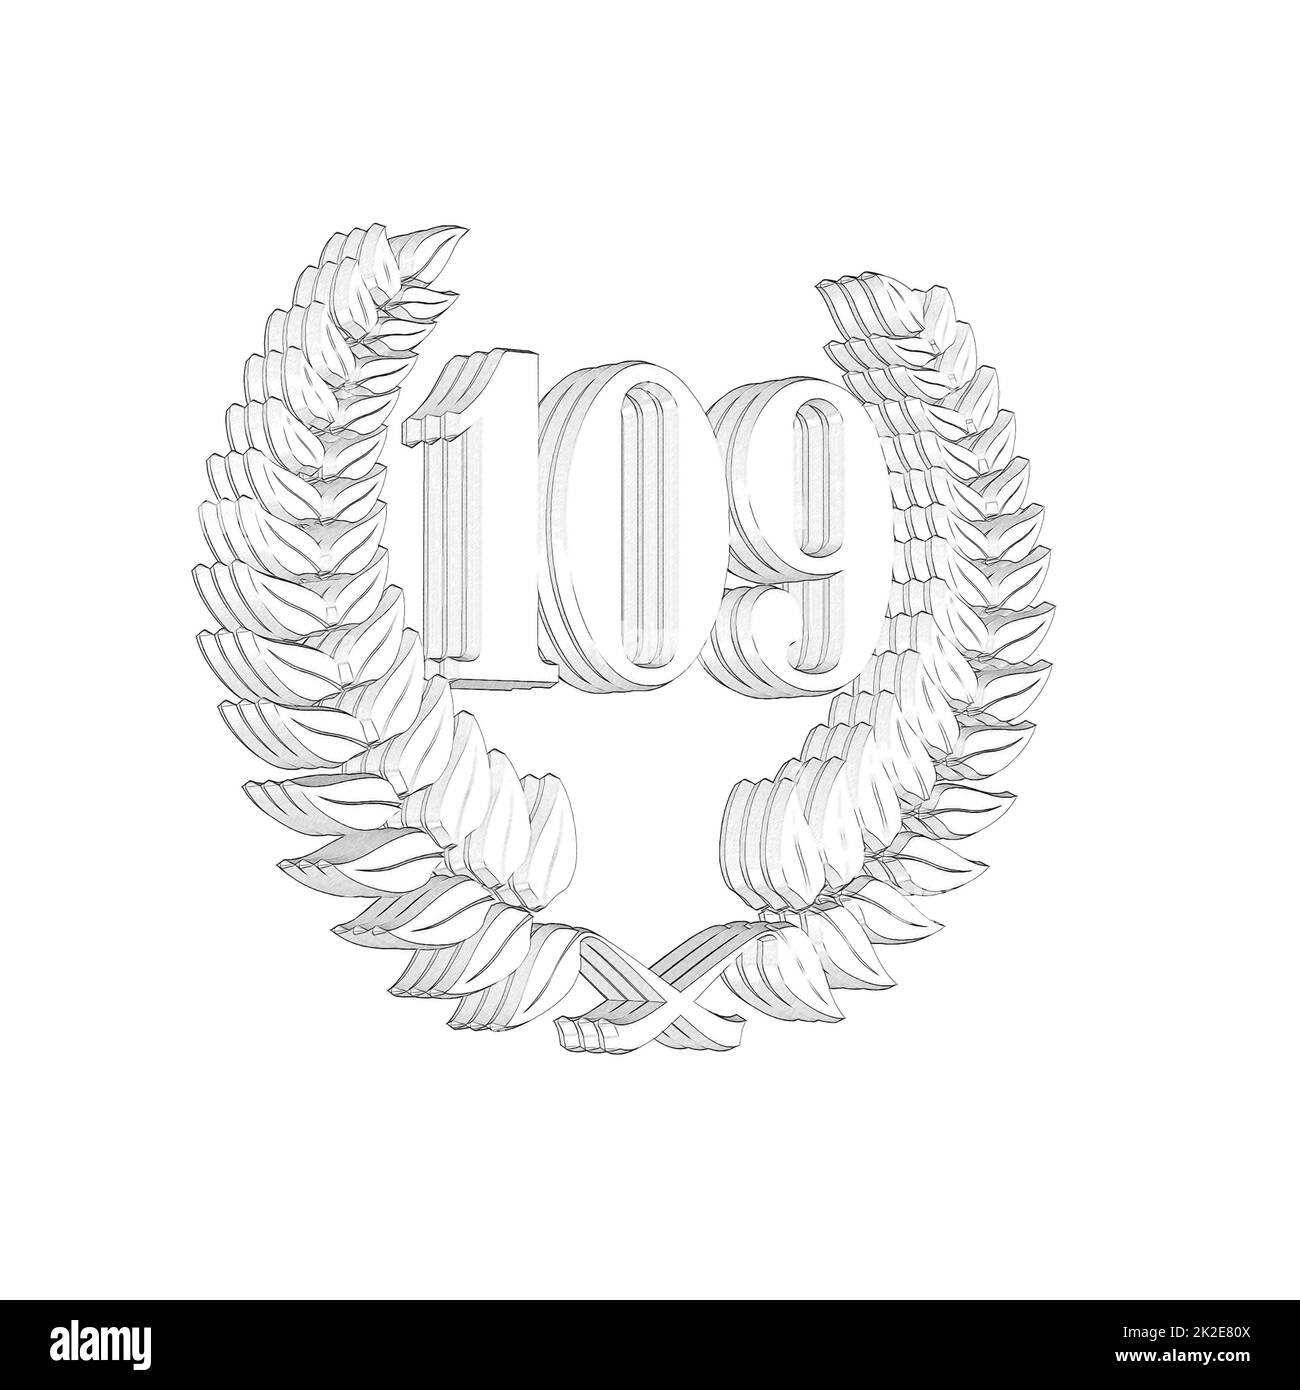 109 Nar Logo Images, Stock Photos, 3D objects, & Vectors